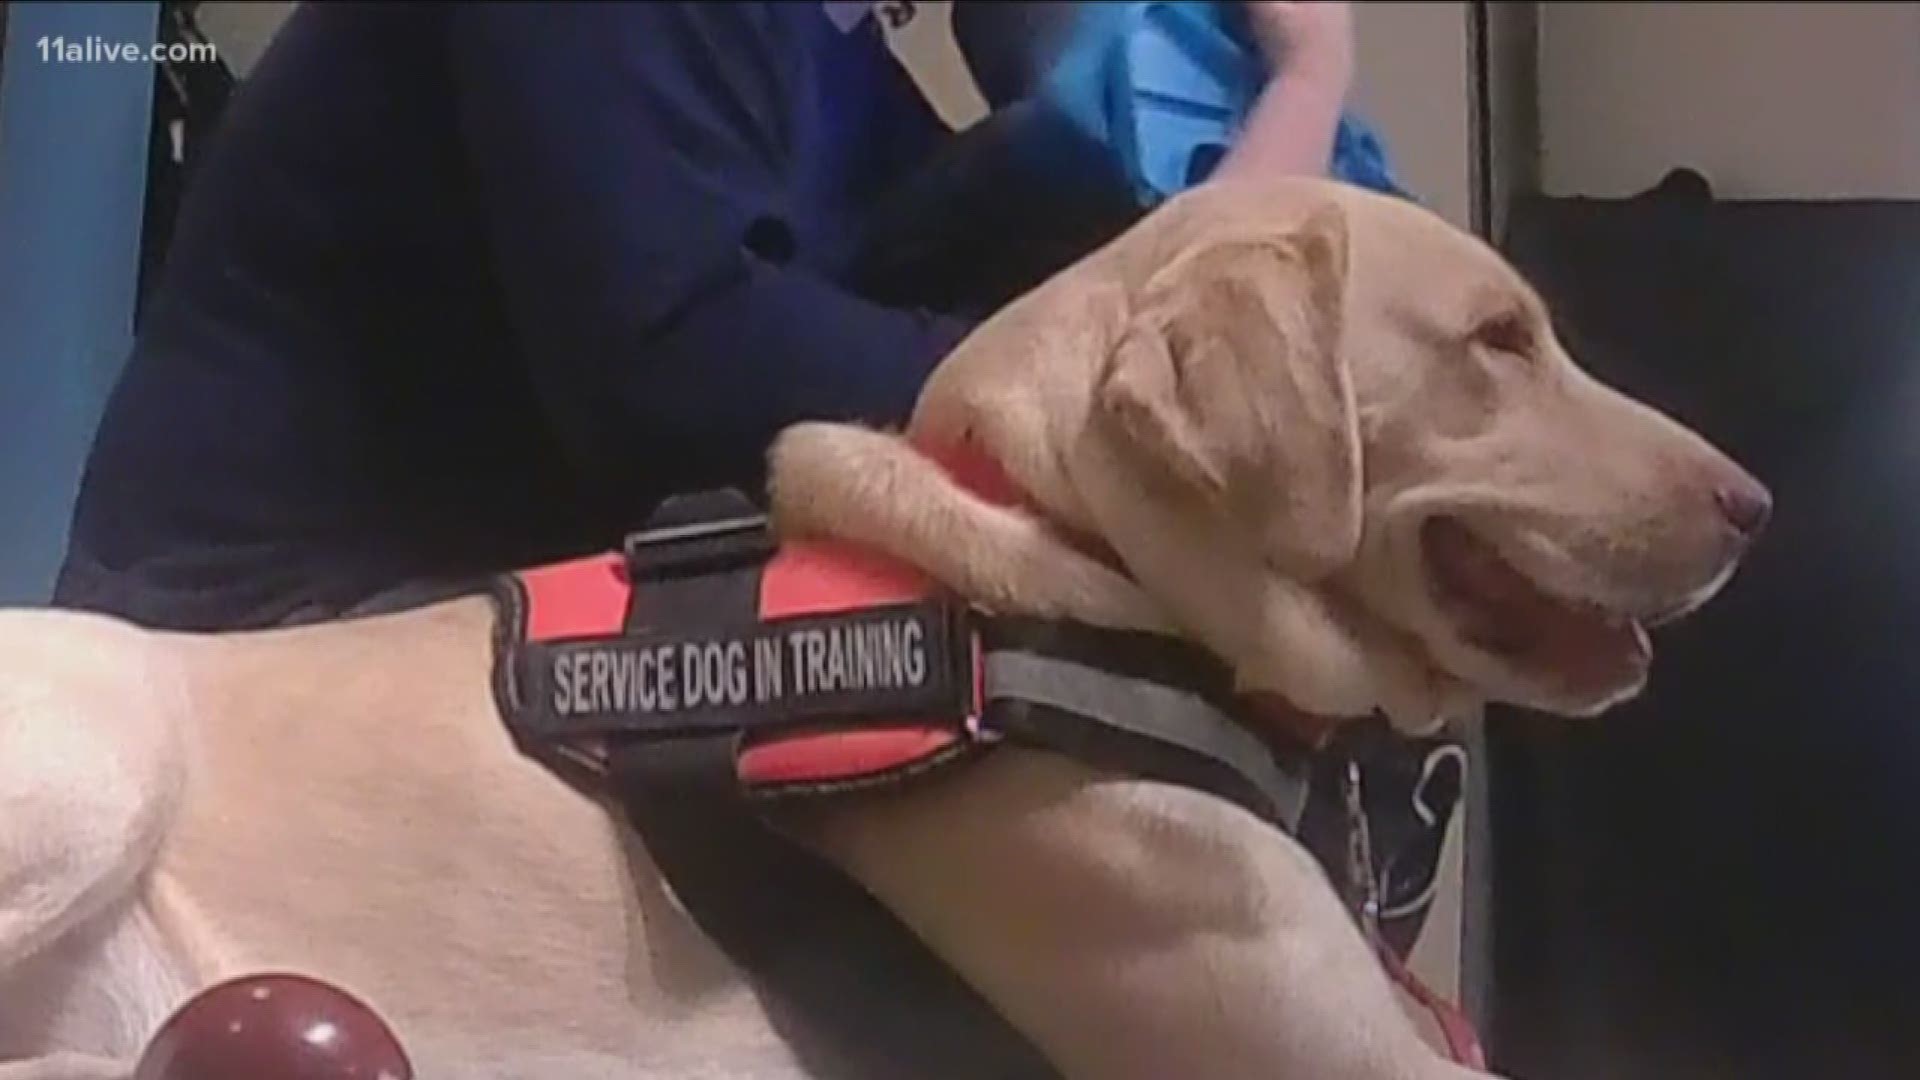 Bentley's is autistic and has a sensory disorder. His mom Kathryn explained that he doesn't show emotion, but when he met River, one of Ranger Dog Training rescue dogs, something was immediately different.